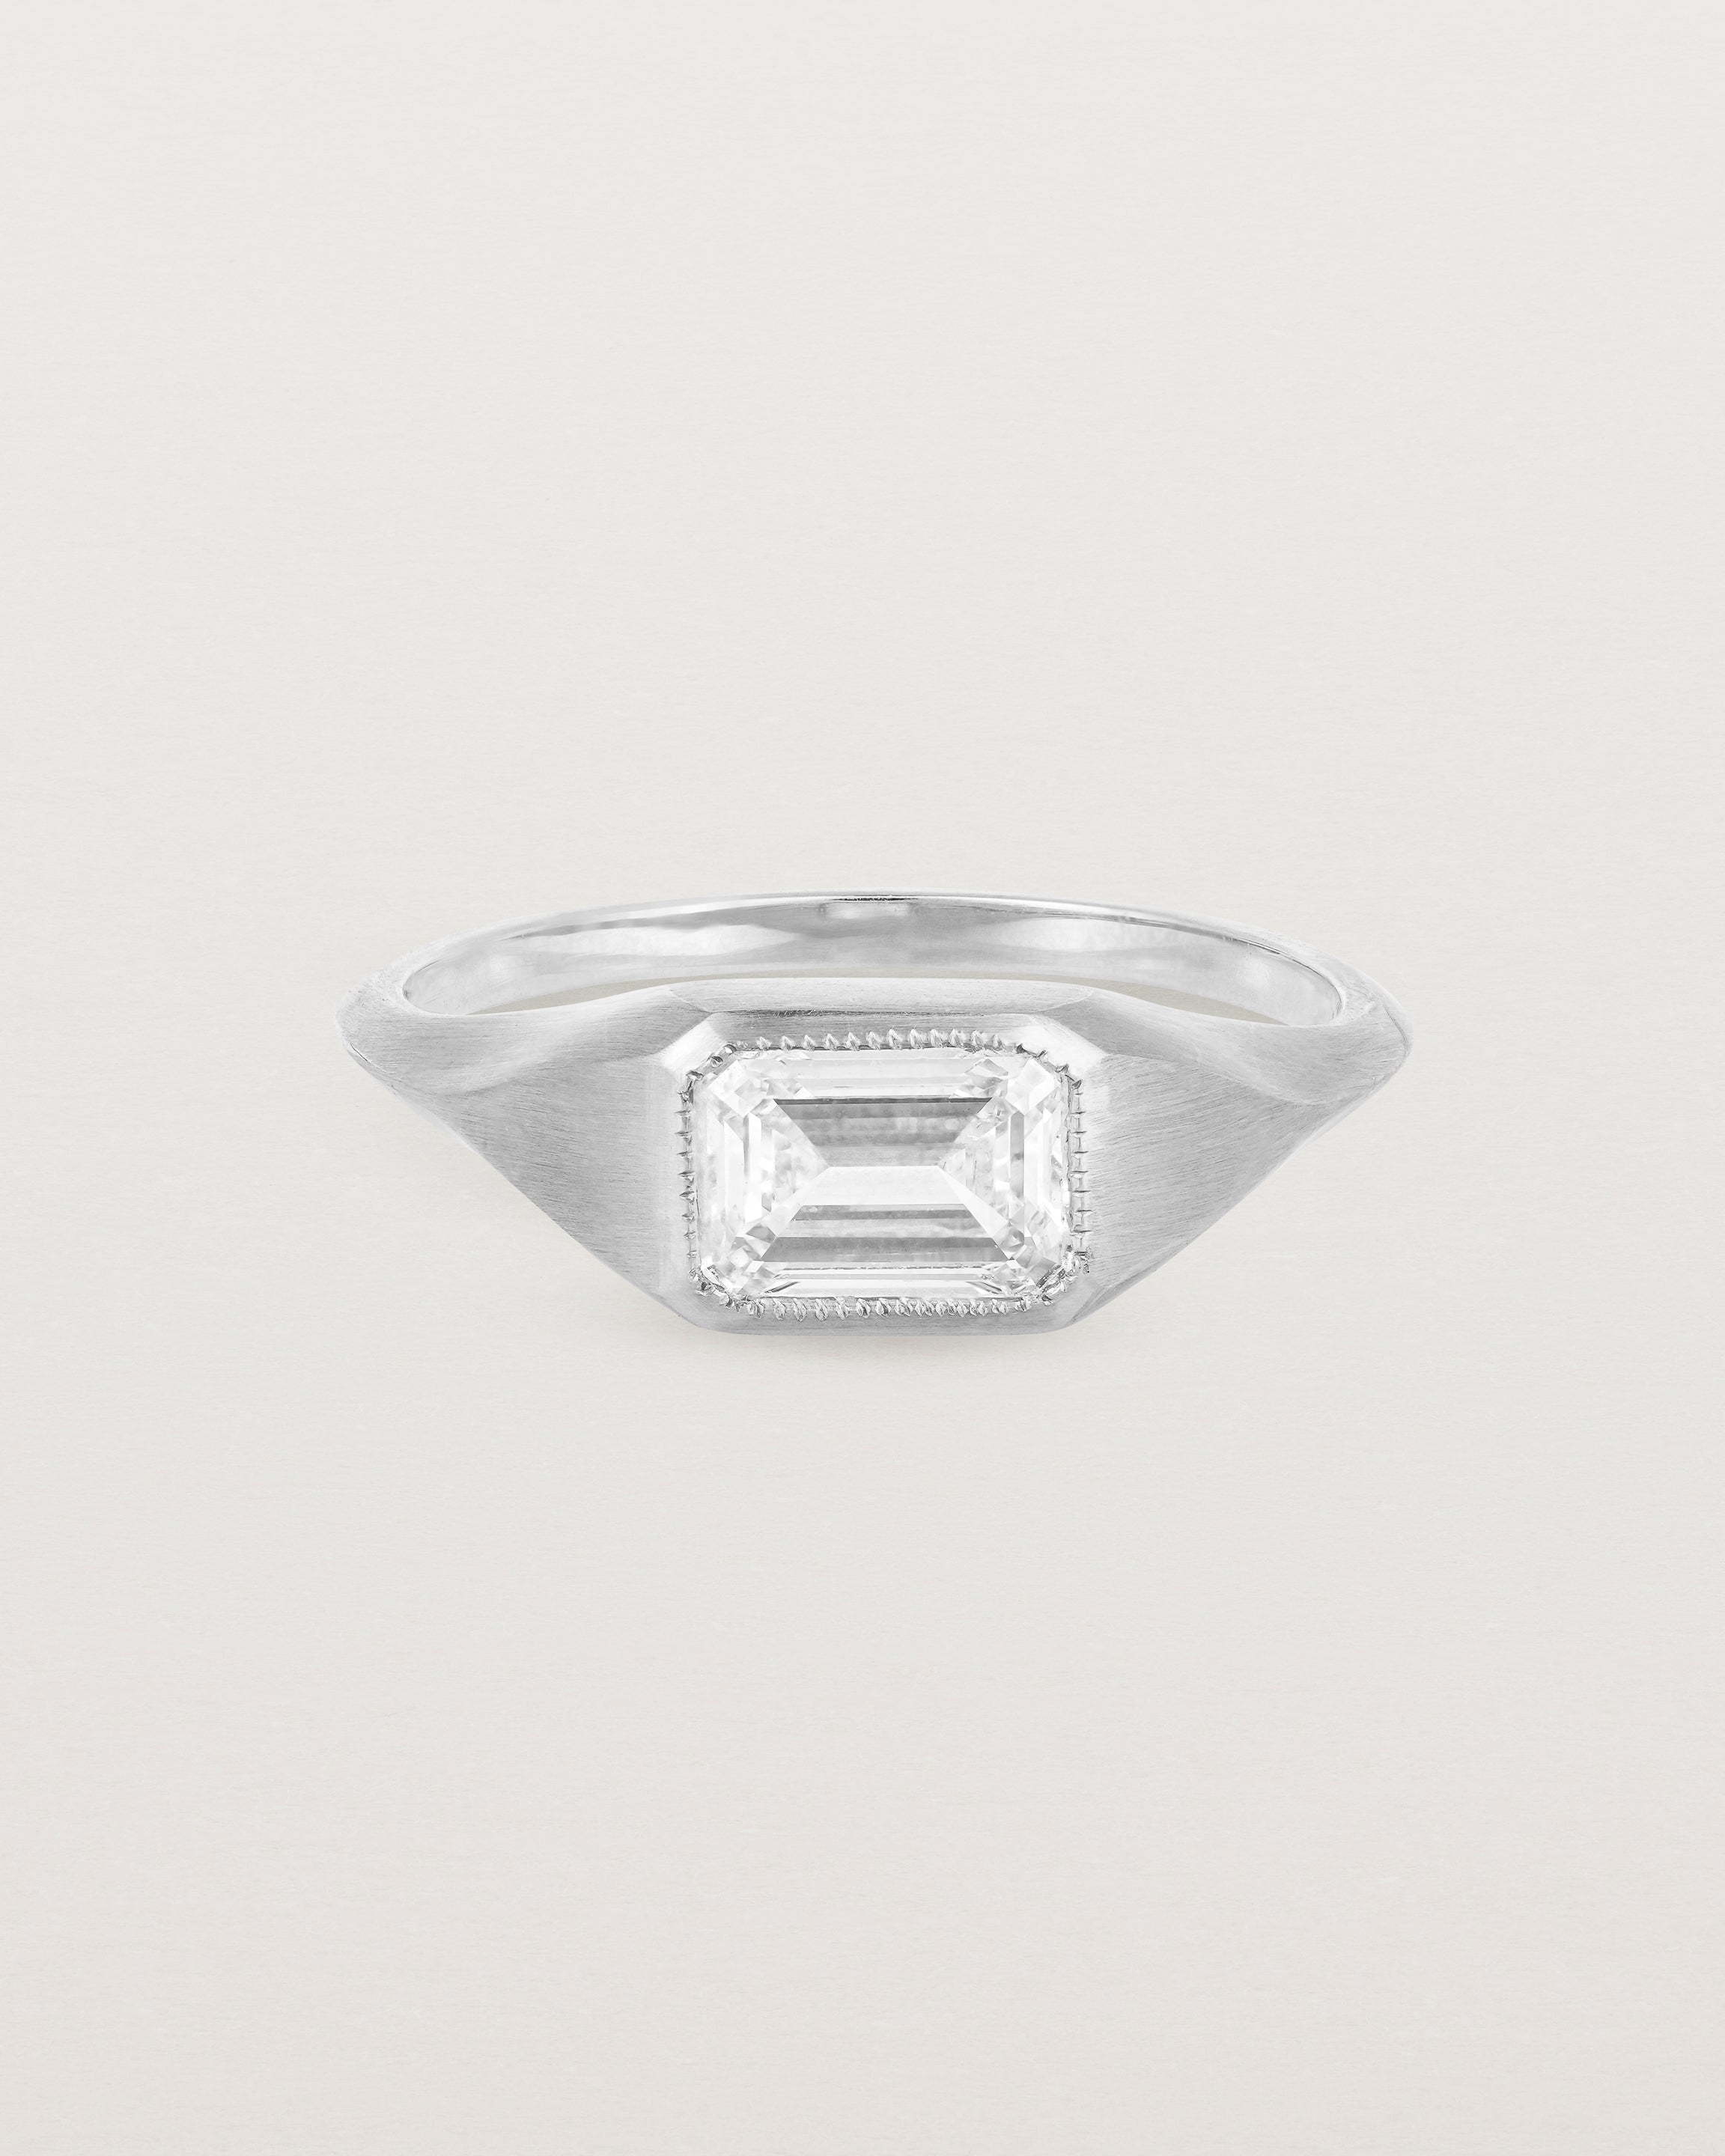 A white gold Signet Ring featuring a emerald cut white diamond. _label:Matte Finish Example